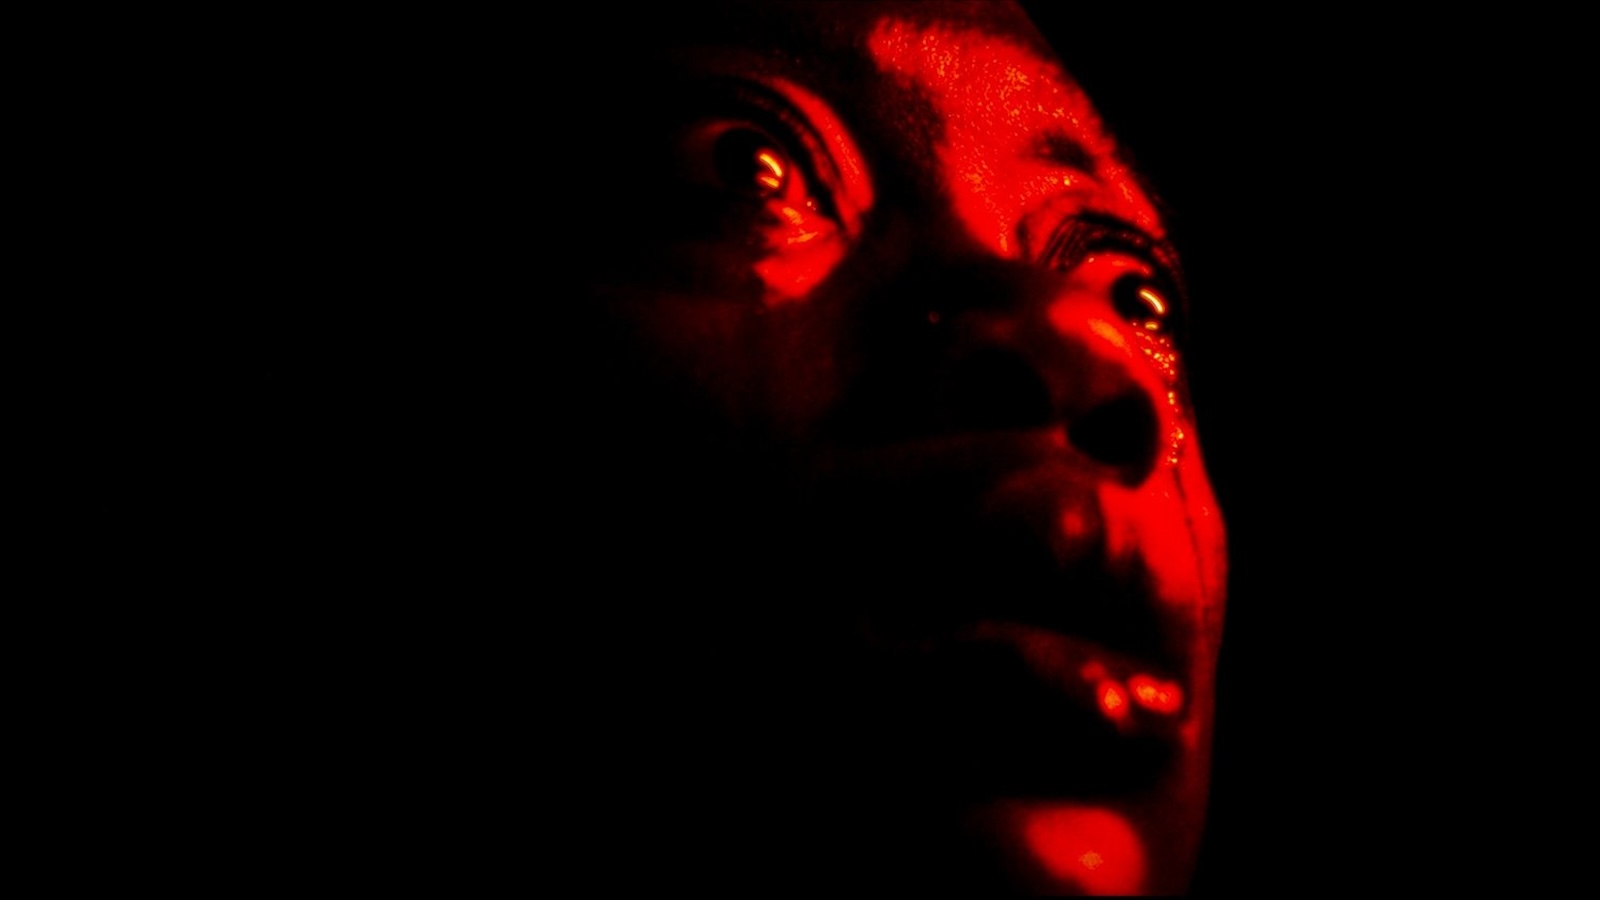 An intense close-up of a face drenched in red looking up and off-screen in panic